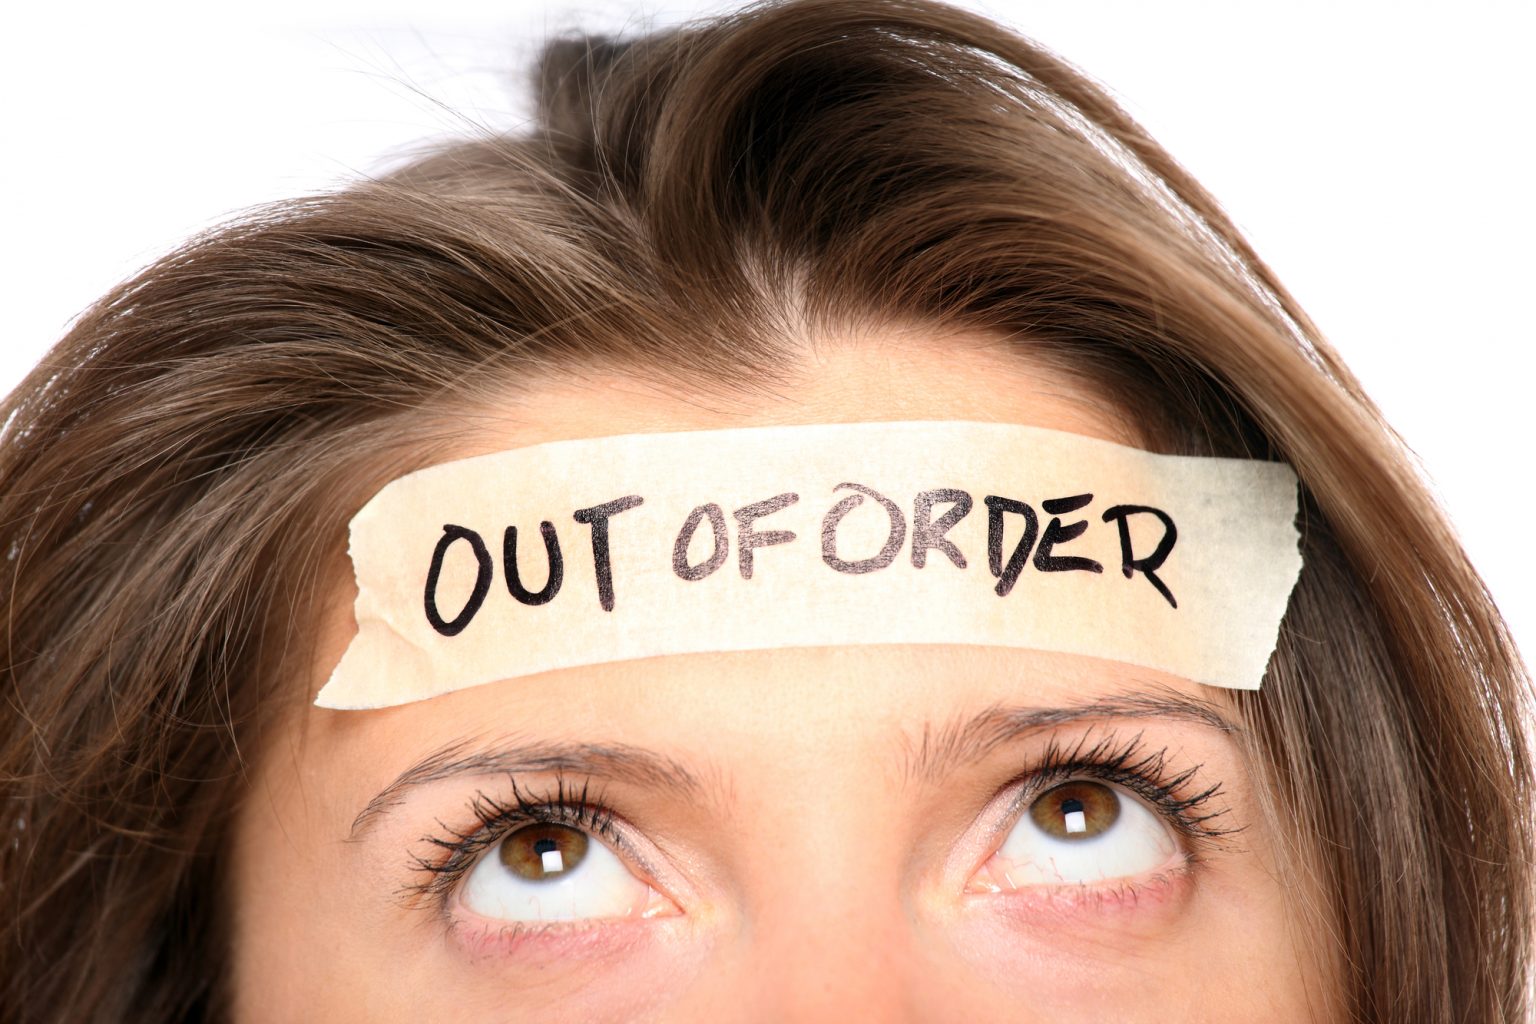 Woman with an "Out of Order" sign taped to her forehead